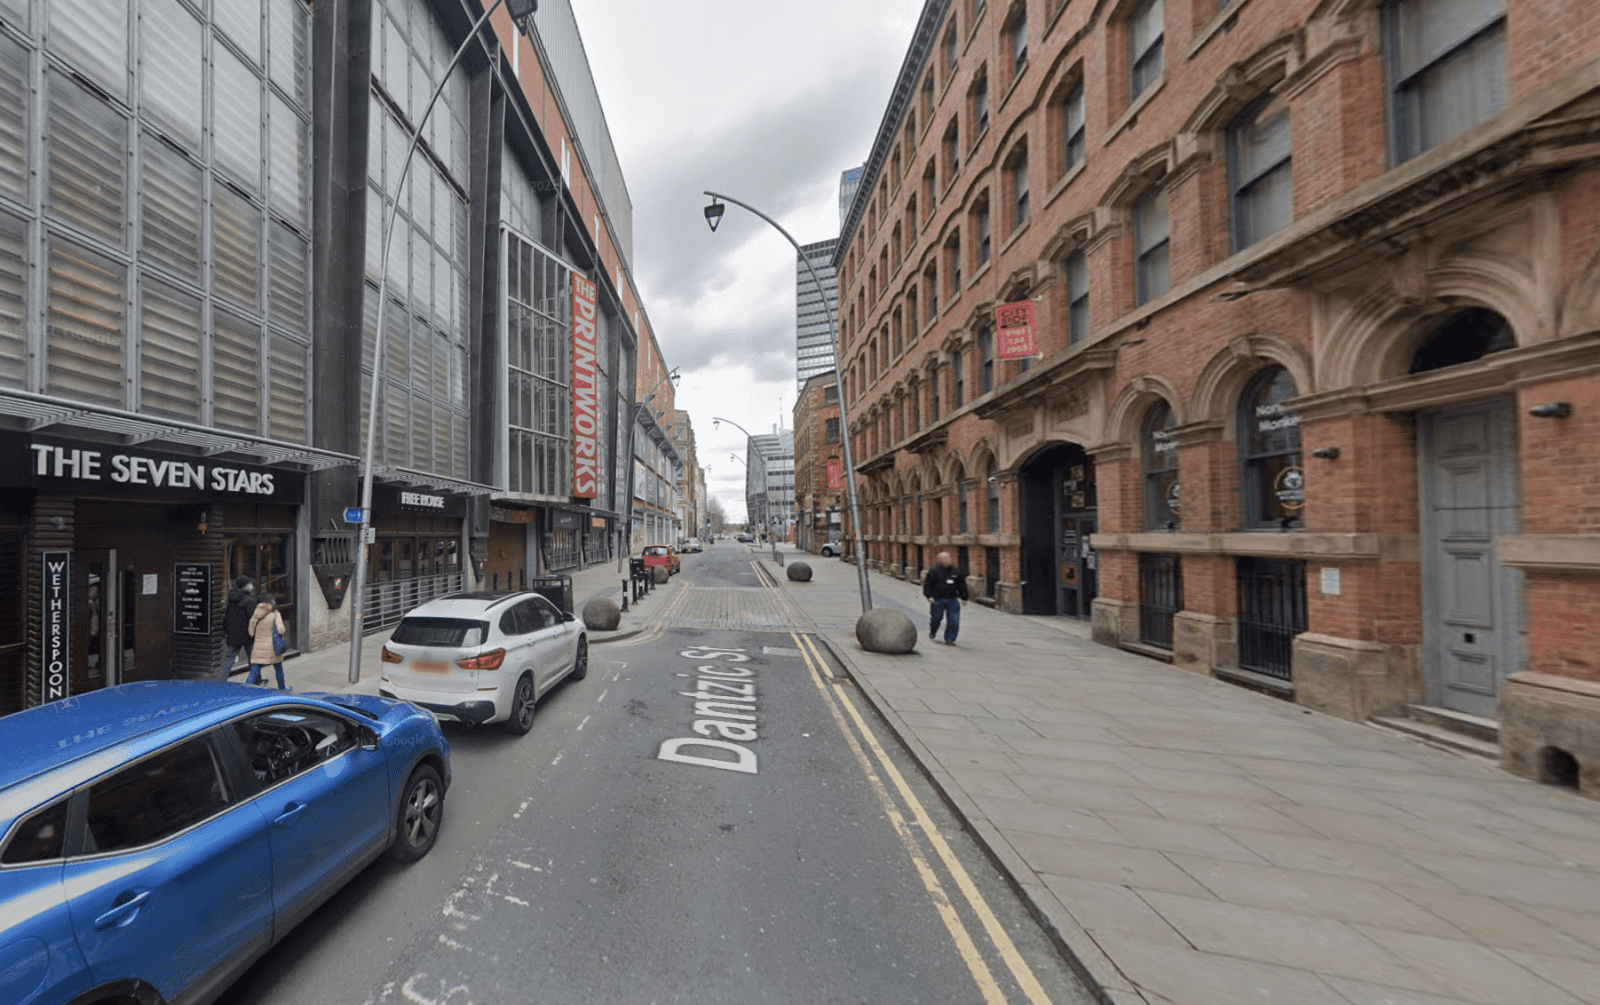 Man charged with murder of 60-year-old passer-by following disturbance near Printworks, The Manc